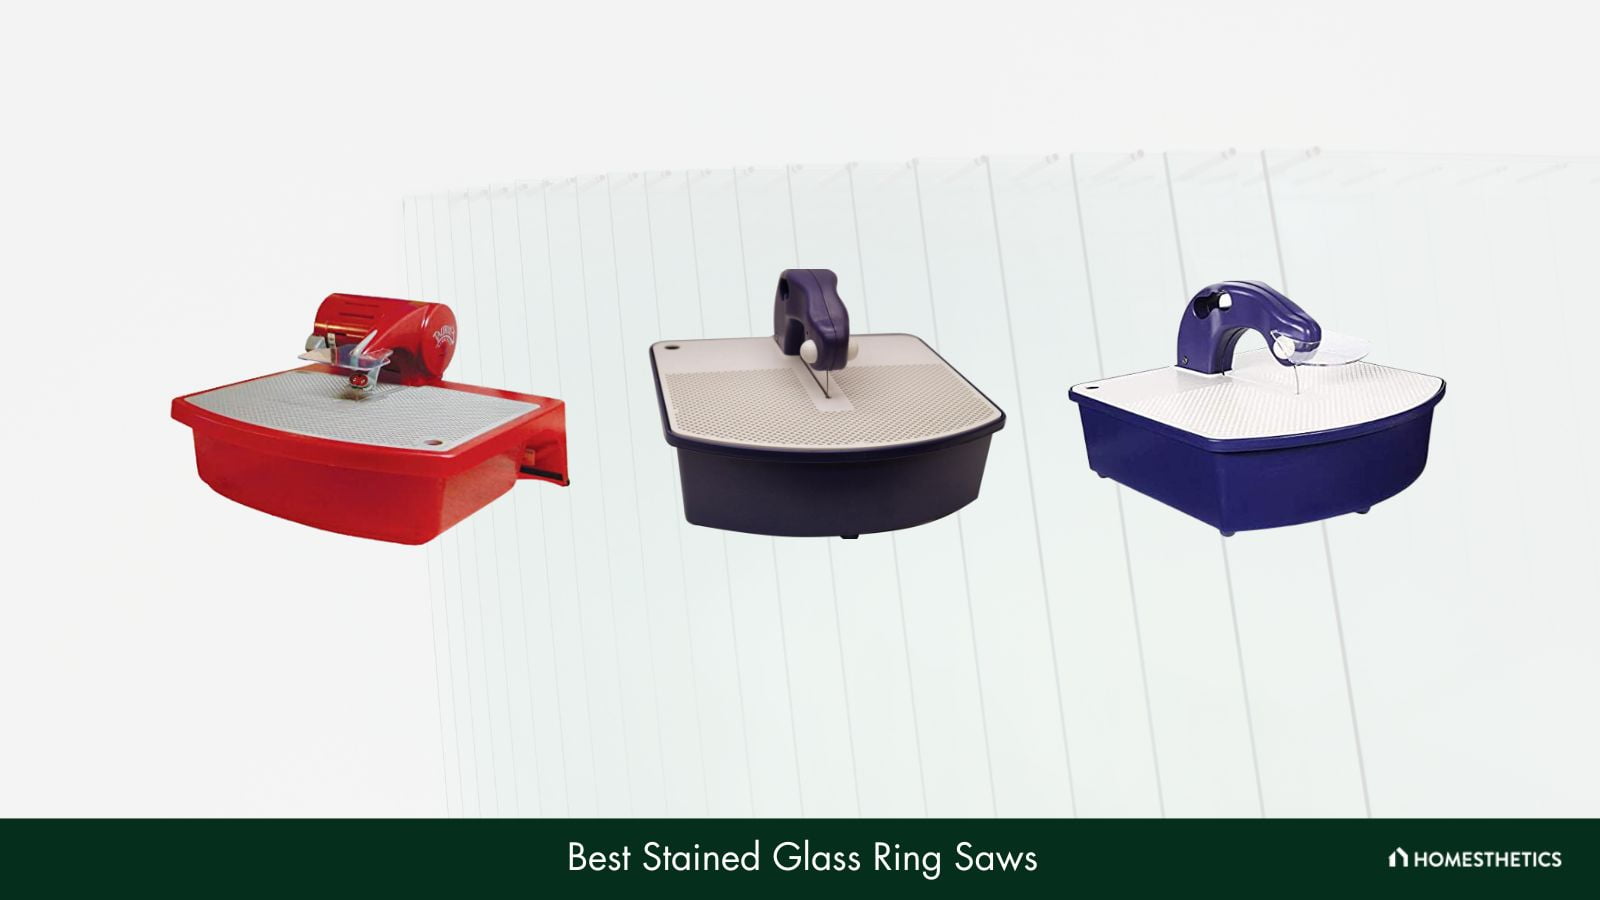 Best Stained Glass Ring Saws